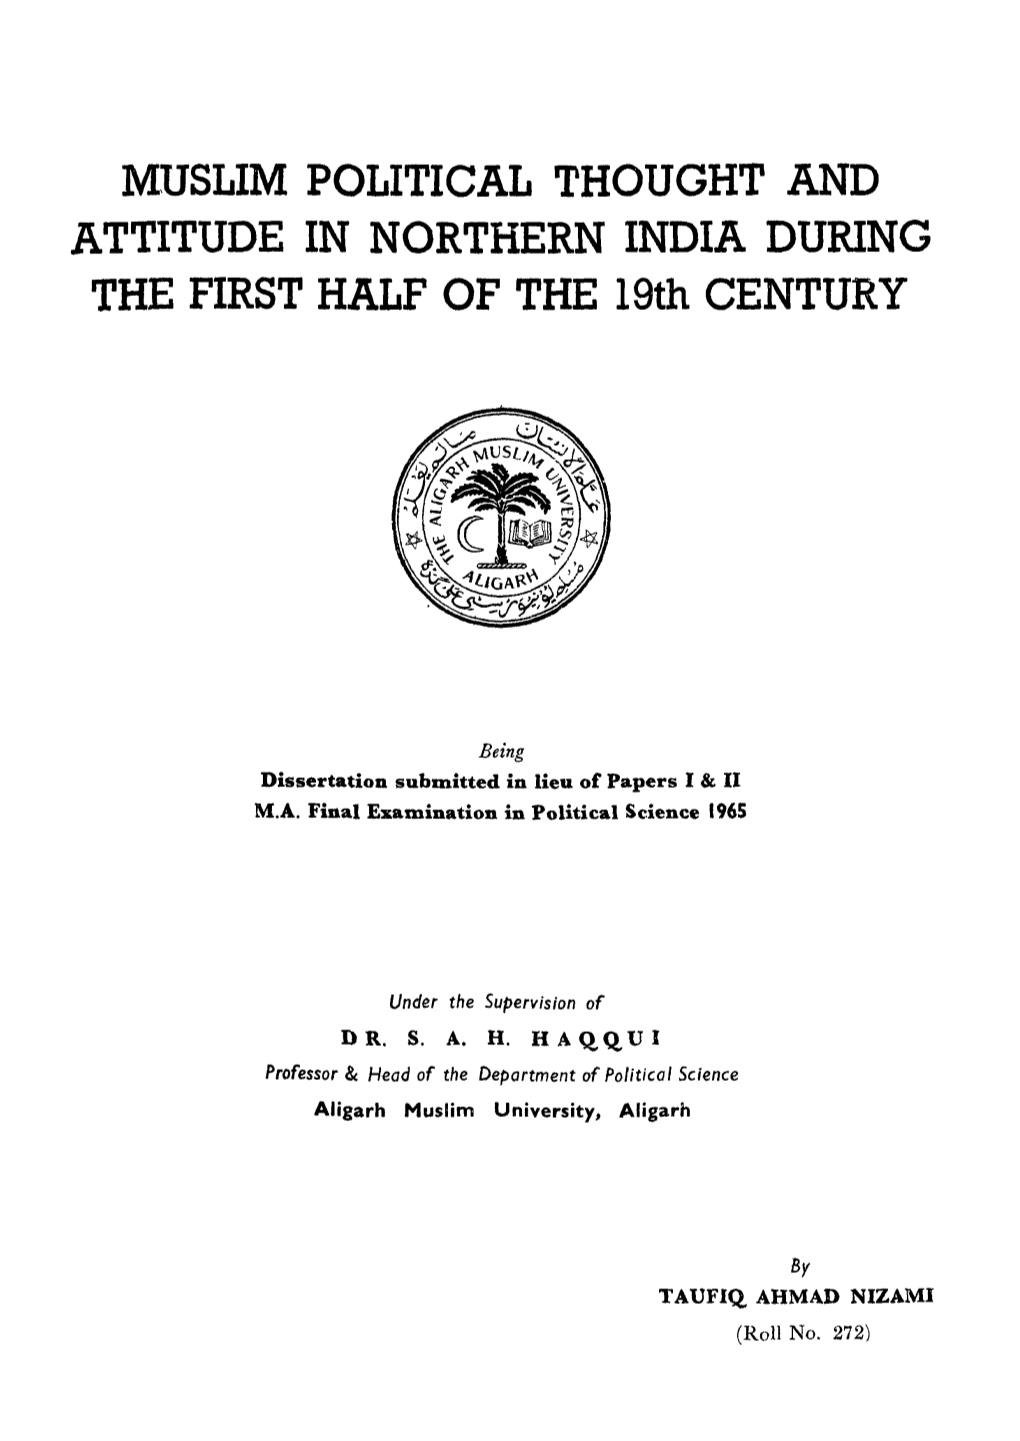 MUSLIM POLITICAL THOUGHT and ATTITUDE in NORTHERN INDIA DURING the FIRST HALF of the 19Th CENTURY